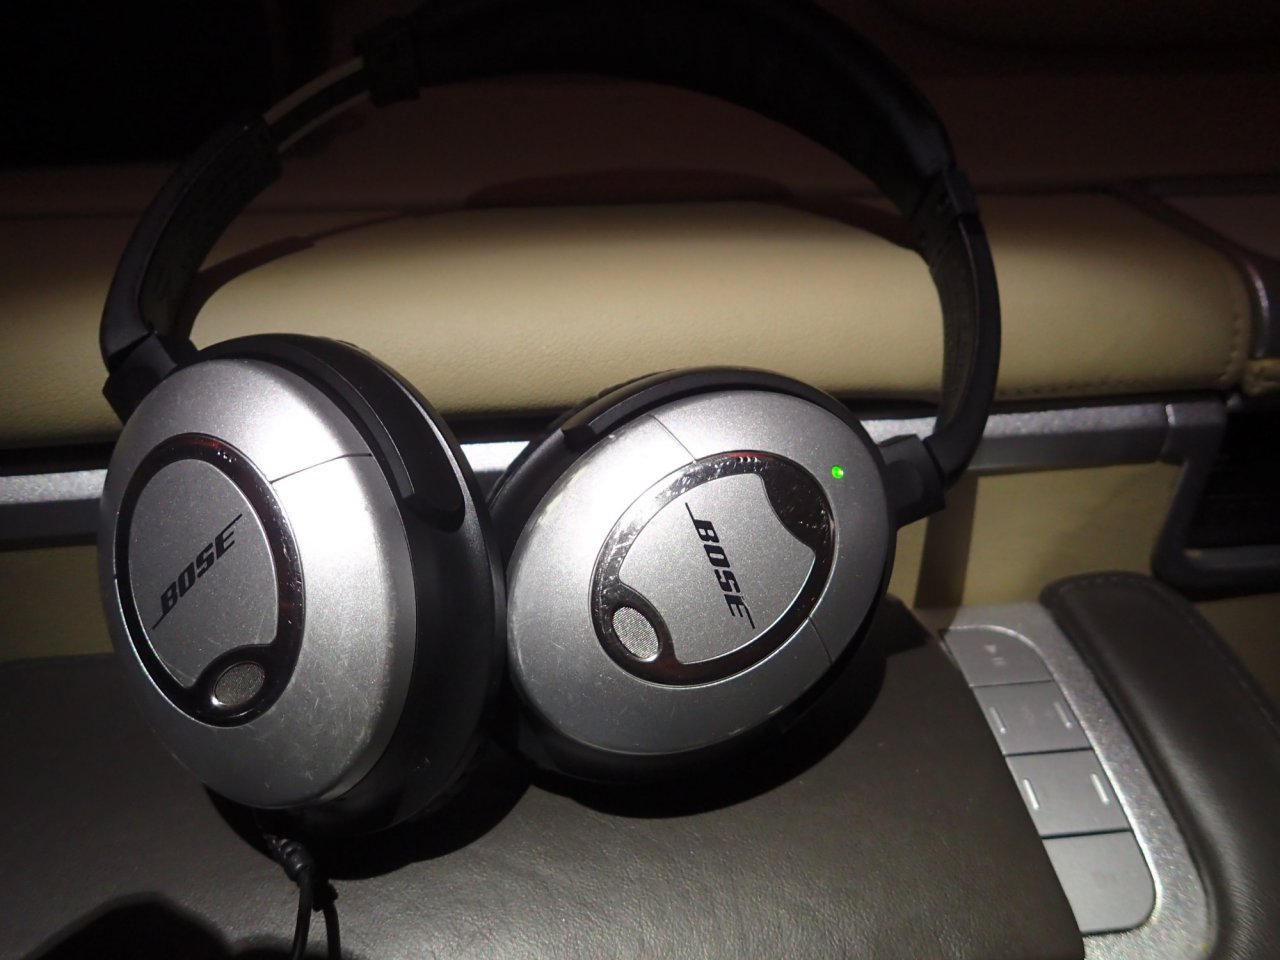 Bose Noise Cancelling Headphones, Lufthansa First Class Review